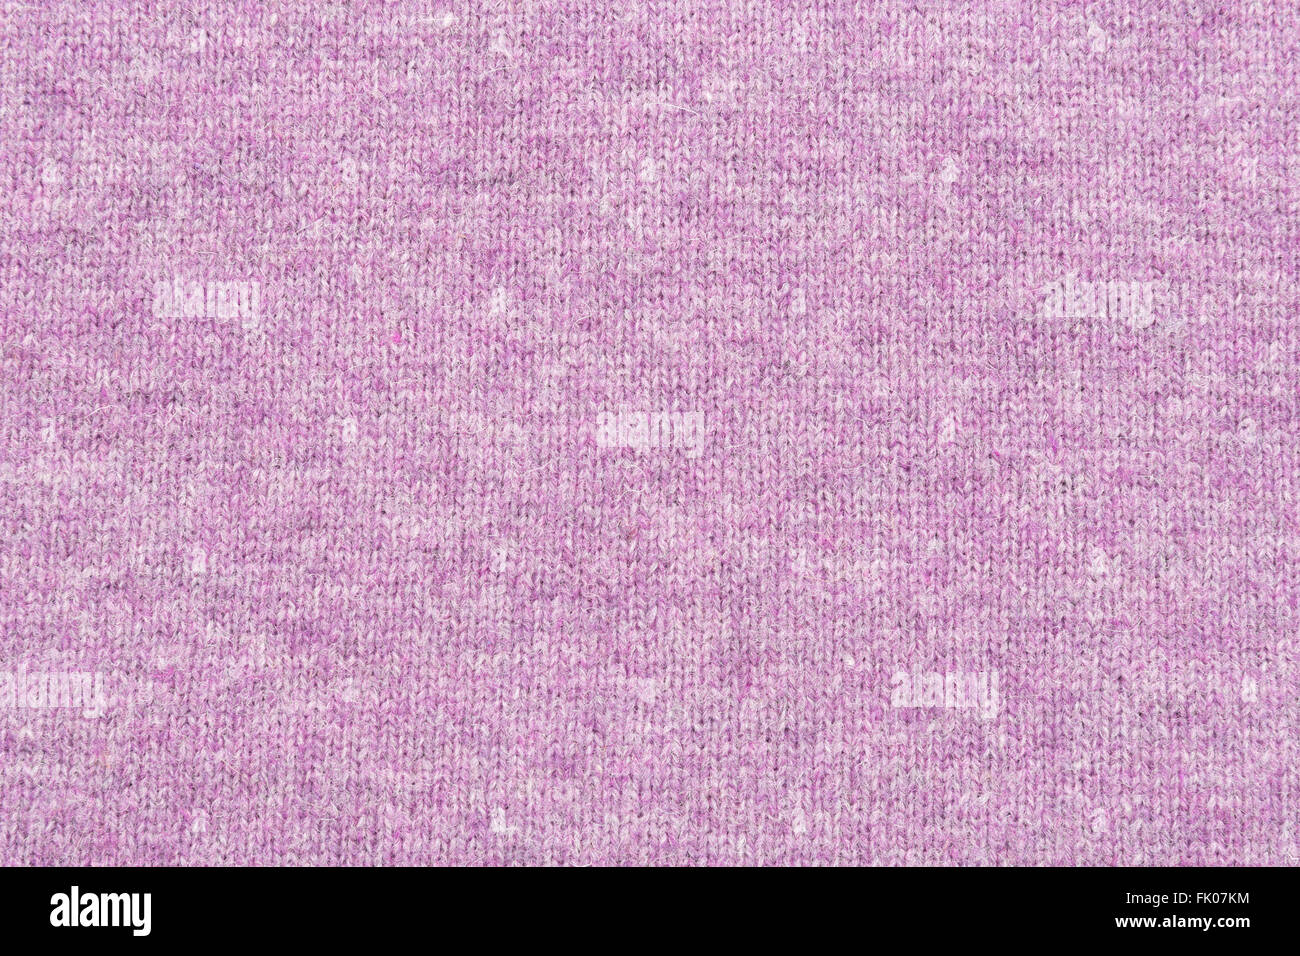 melange purple woolen knitted fabric as background Stock Photo